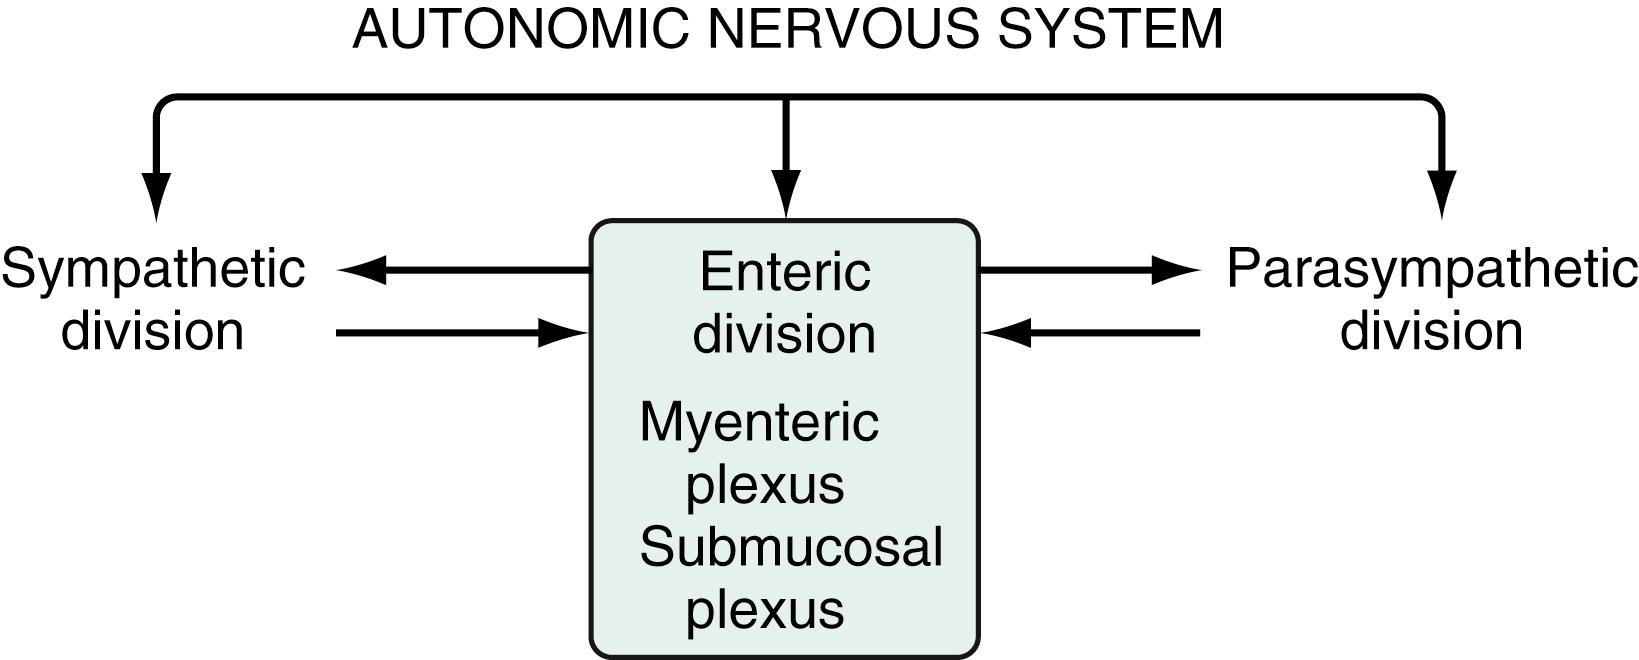 Fig. 51.6, The autonomic nervous system consists of sympathetic, parasympathetic, and enteric divisions. The enteric division consists of the myenteric plexus, which primarily regulates motility, and the submucosal plexus, which primarily regulates secretion. Although the enteric division can function autonomously, it receives input from and sends projections to the other divisions.